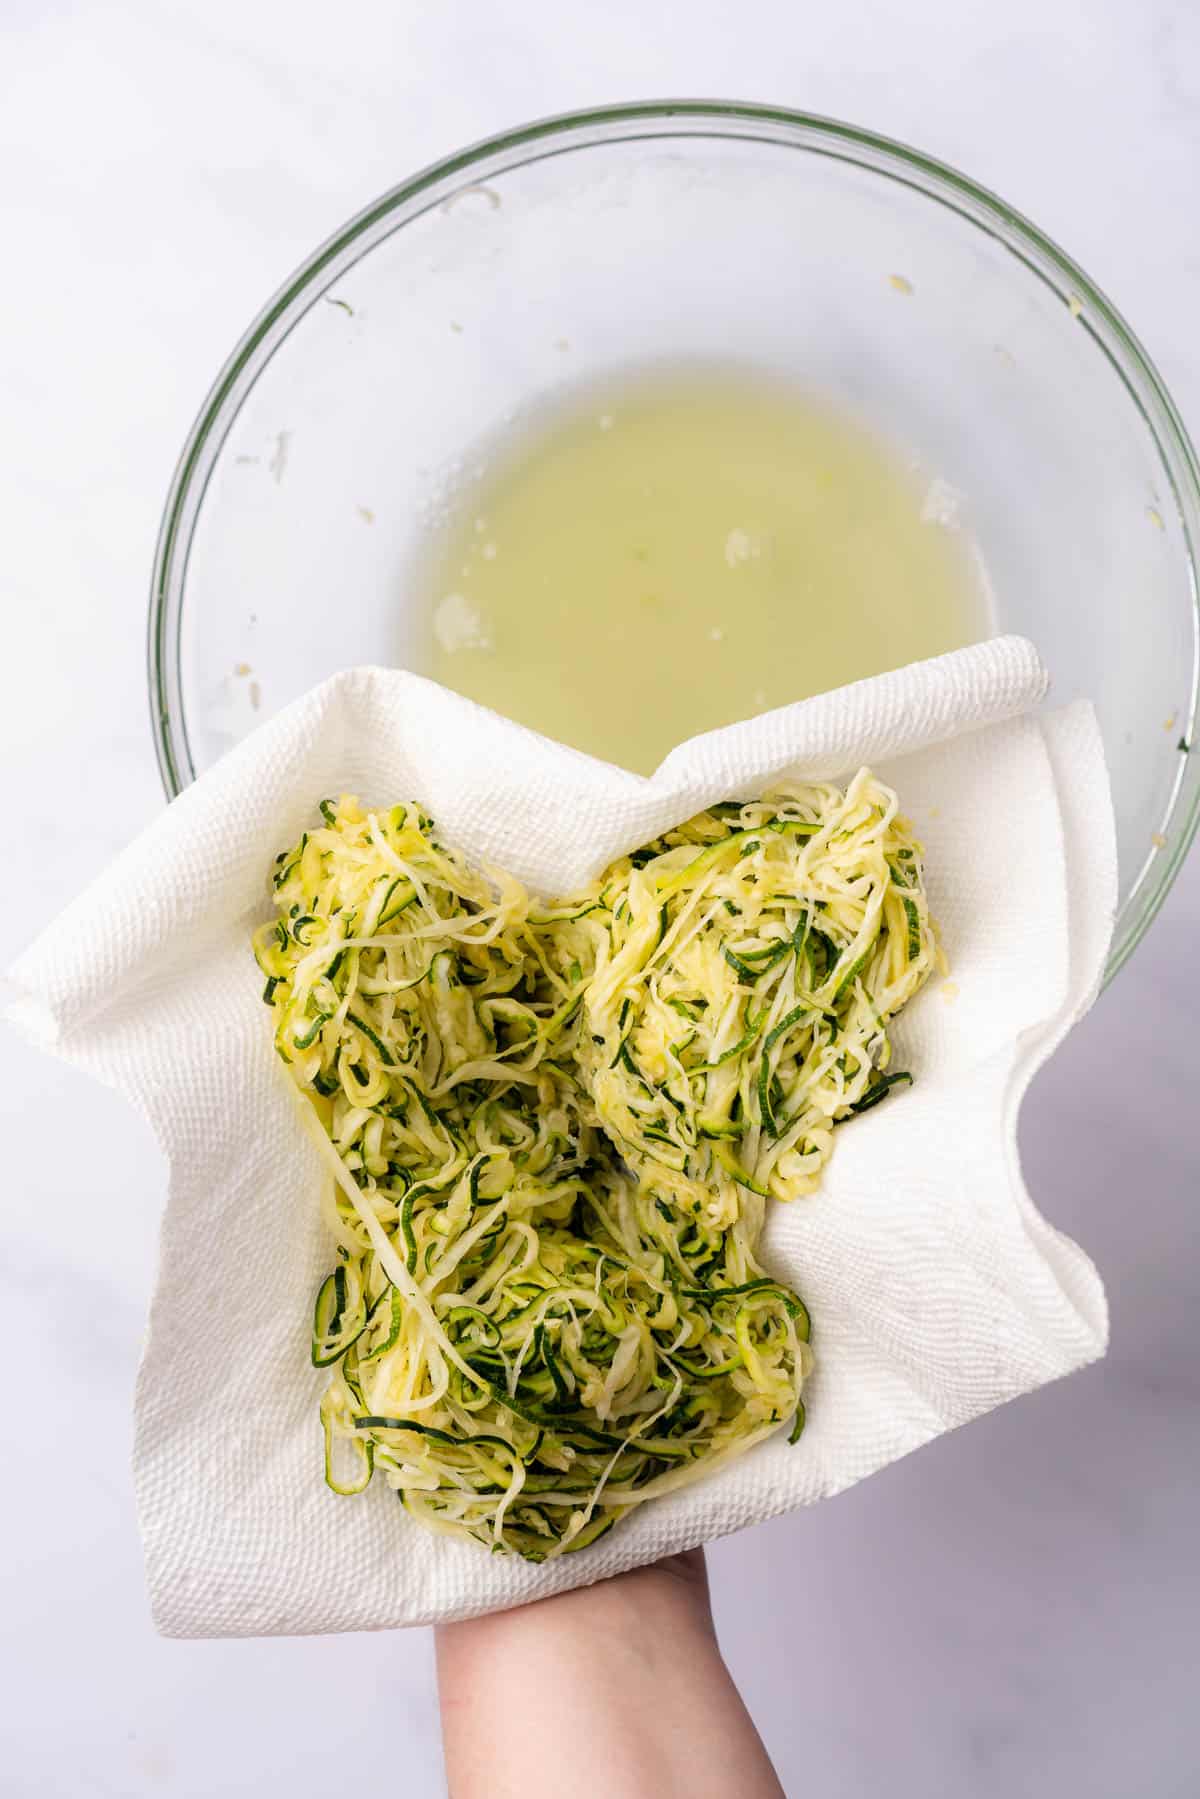 squeezing excess moisture out from zucchini noodles with paper towel